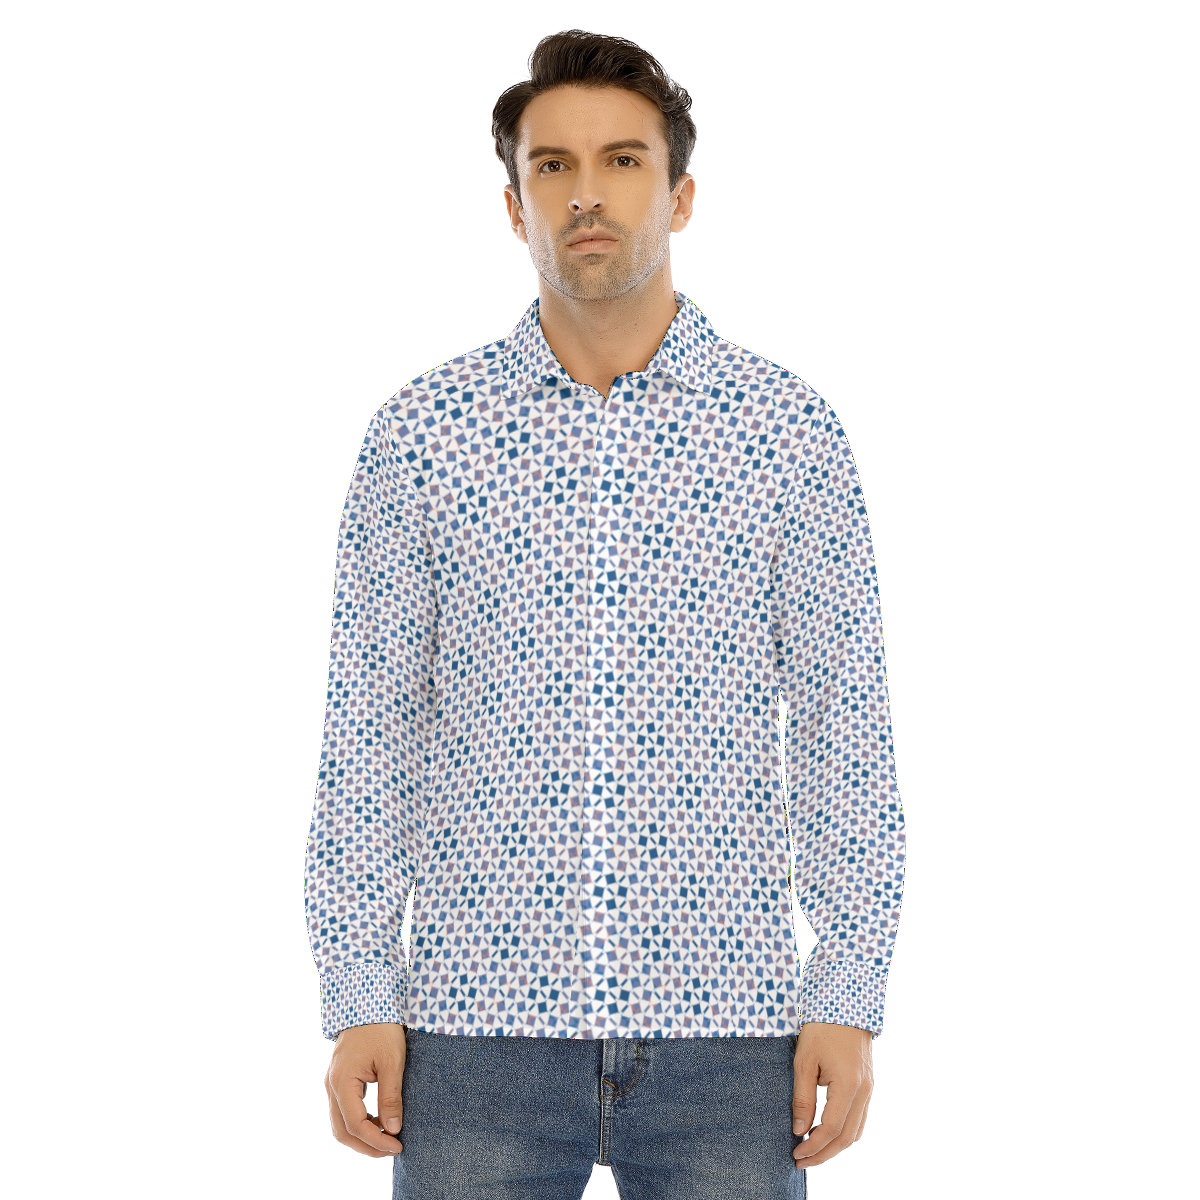 Budapest Men's Buttonup Shirt With Concealed Placket